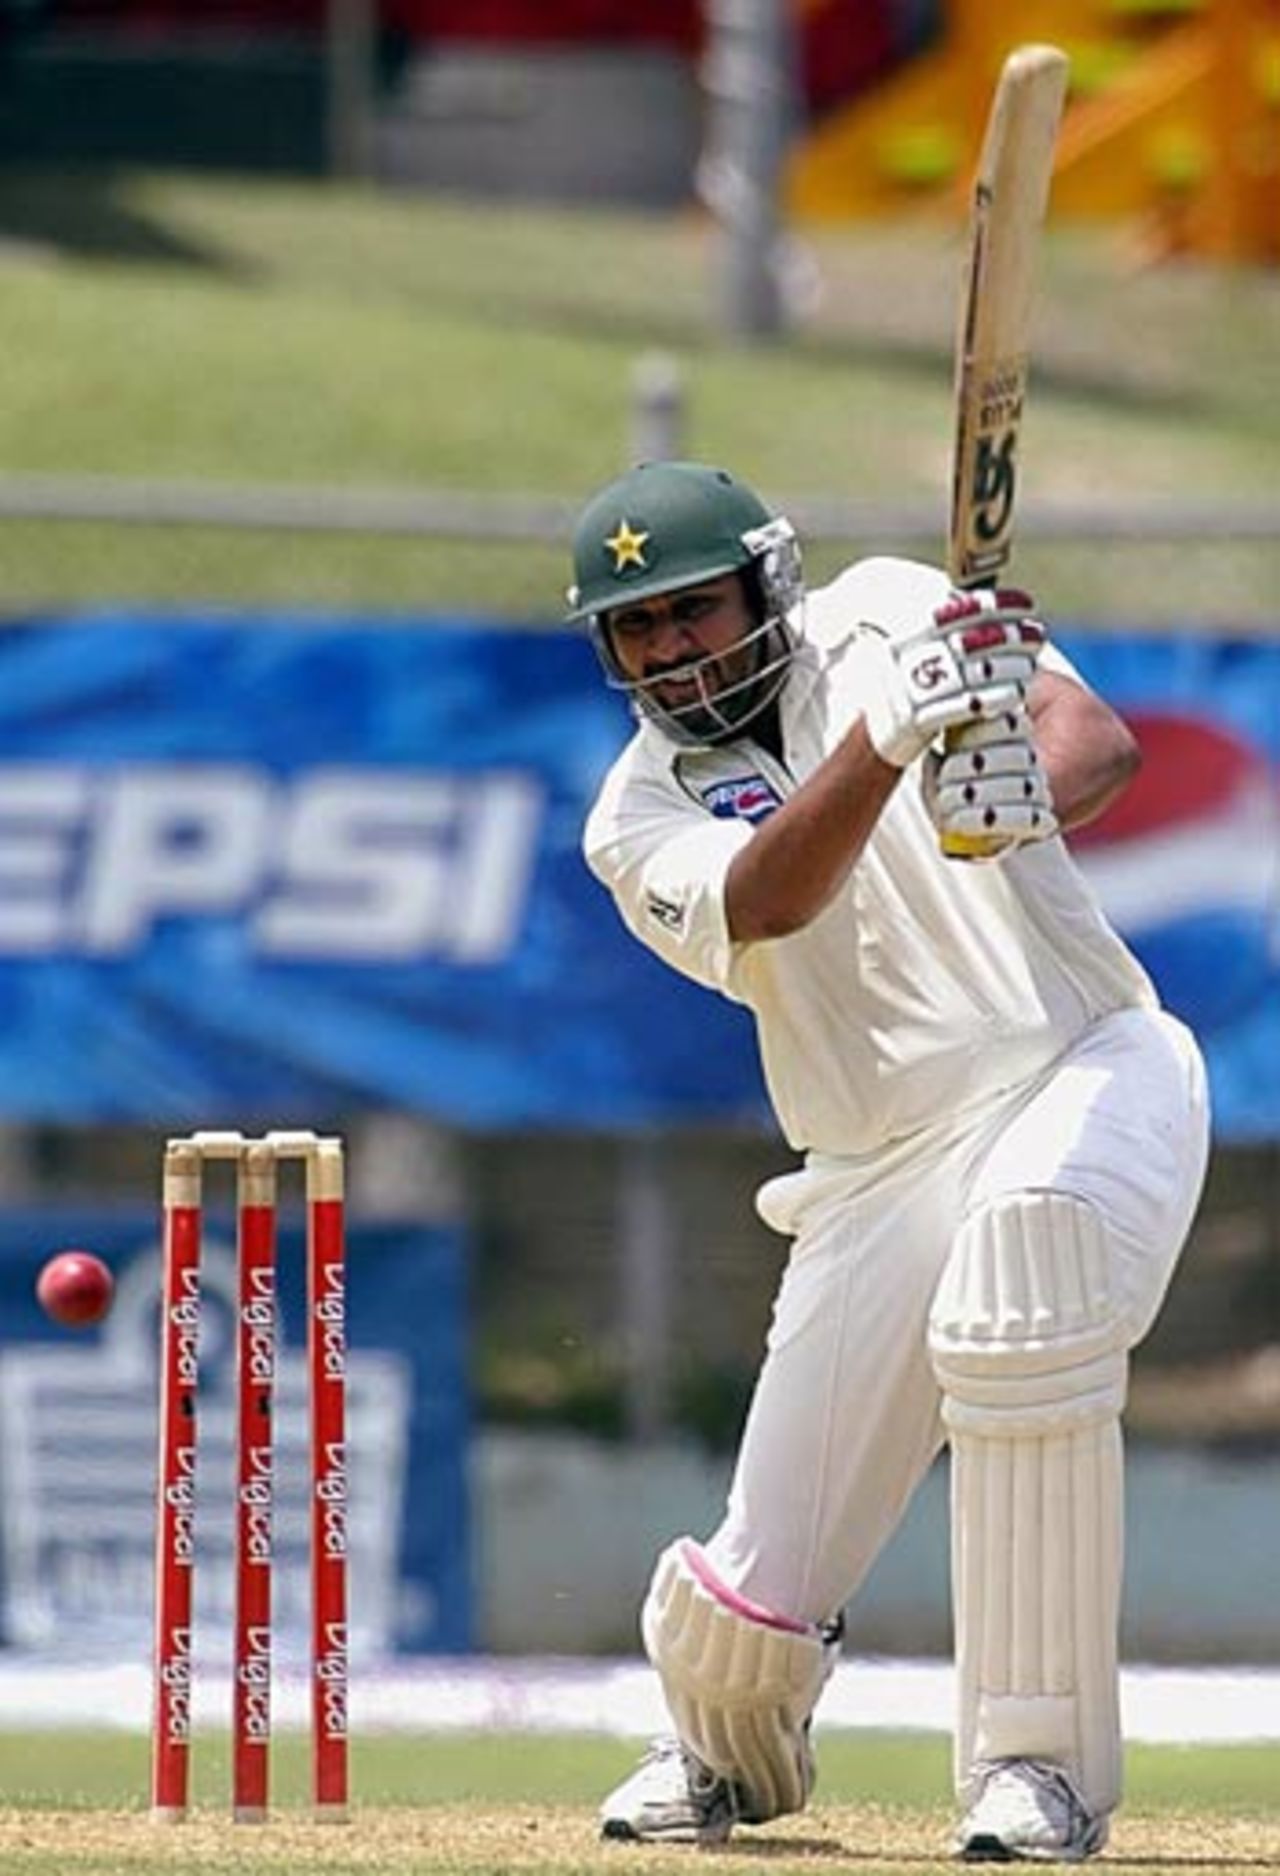 Inzamam-ul-Haq drives one on the off side en route to his half-century, West Indies v Pakistan, 2nd Test, Jamaica, June 3, 2005